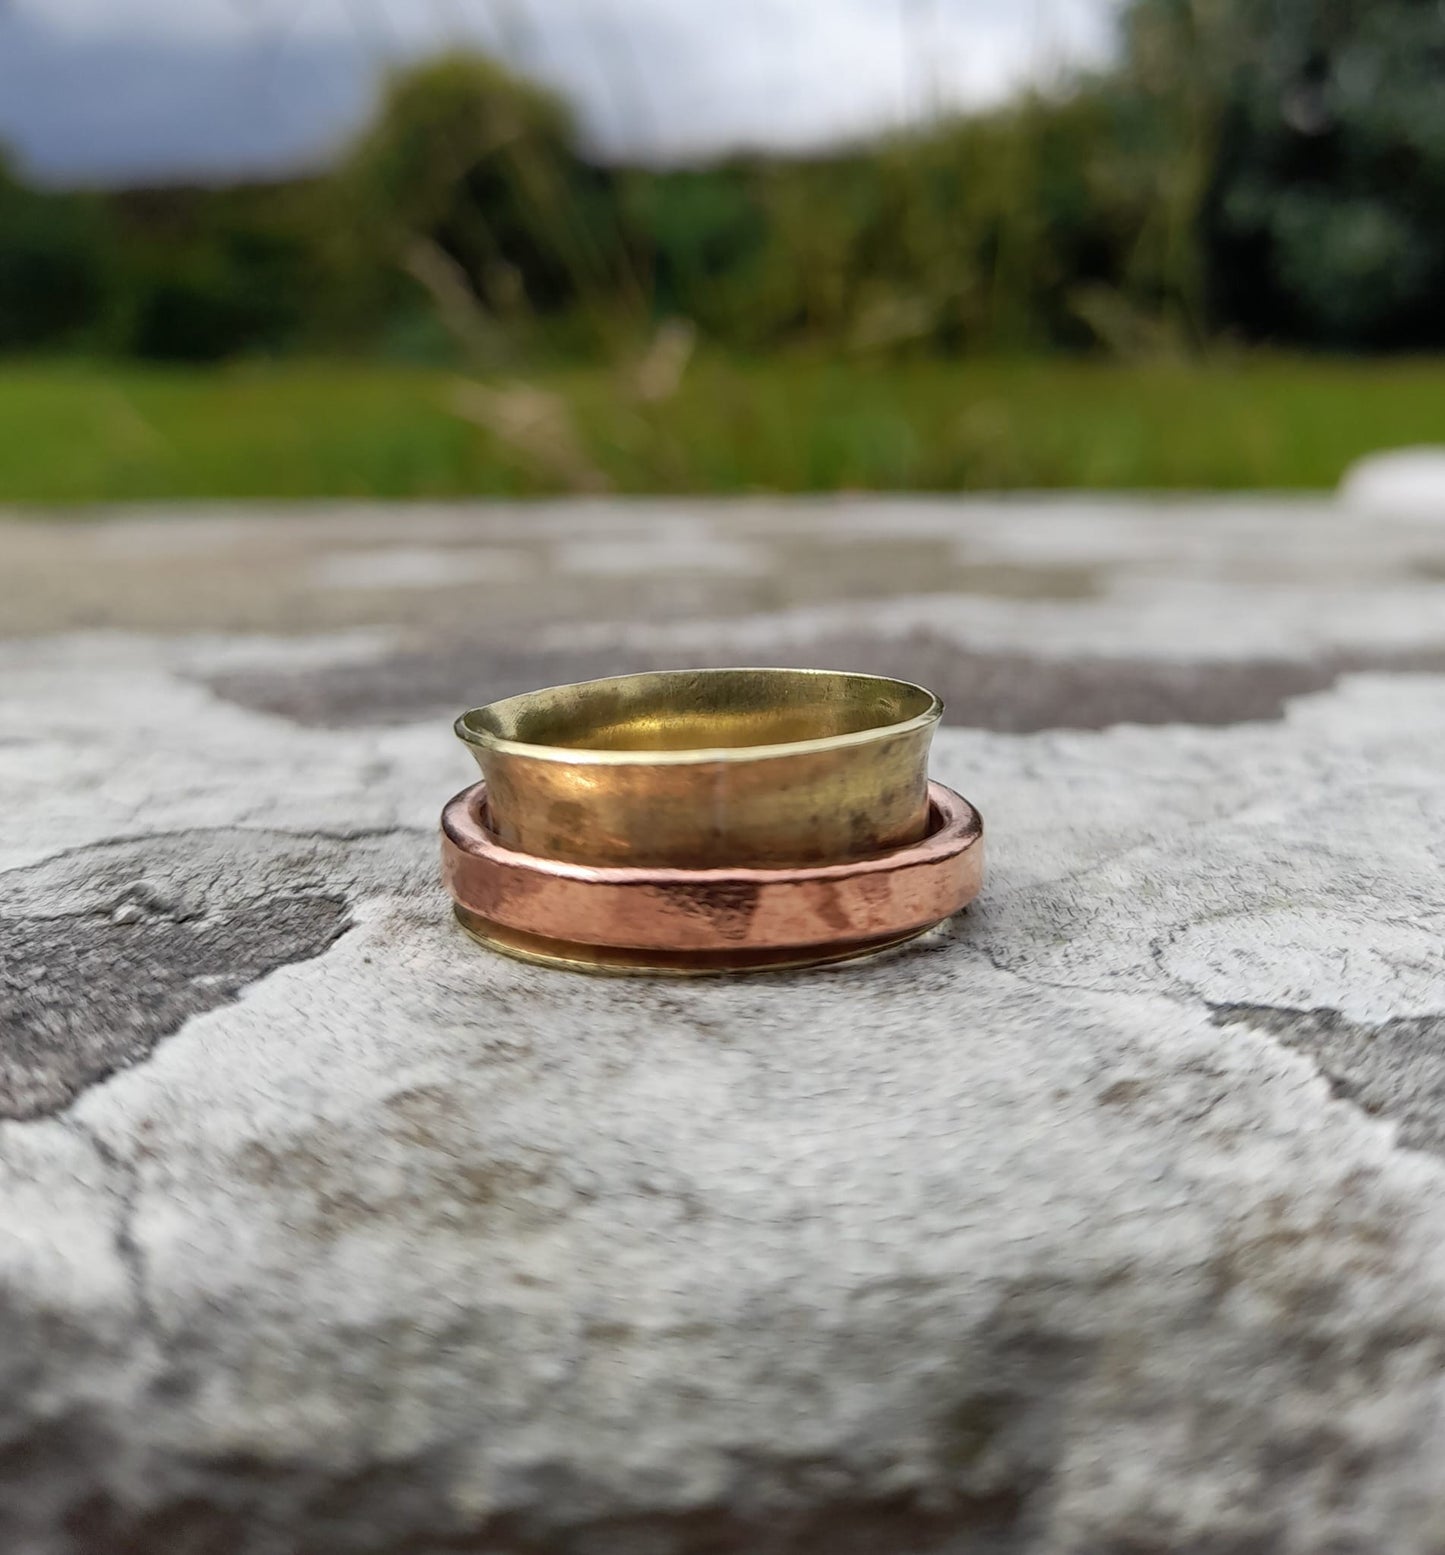 Brass and Mixed Metal Spinner Rings. Spinner Rings For Anxiety. Unisex Spinning Rings For Meditation